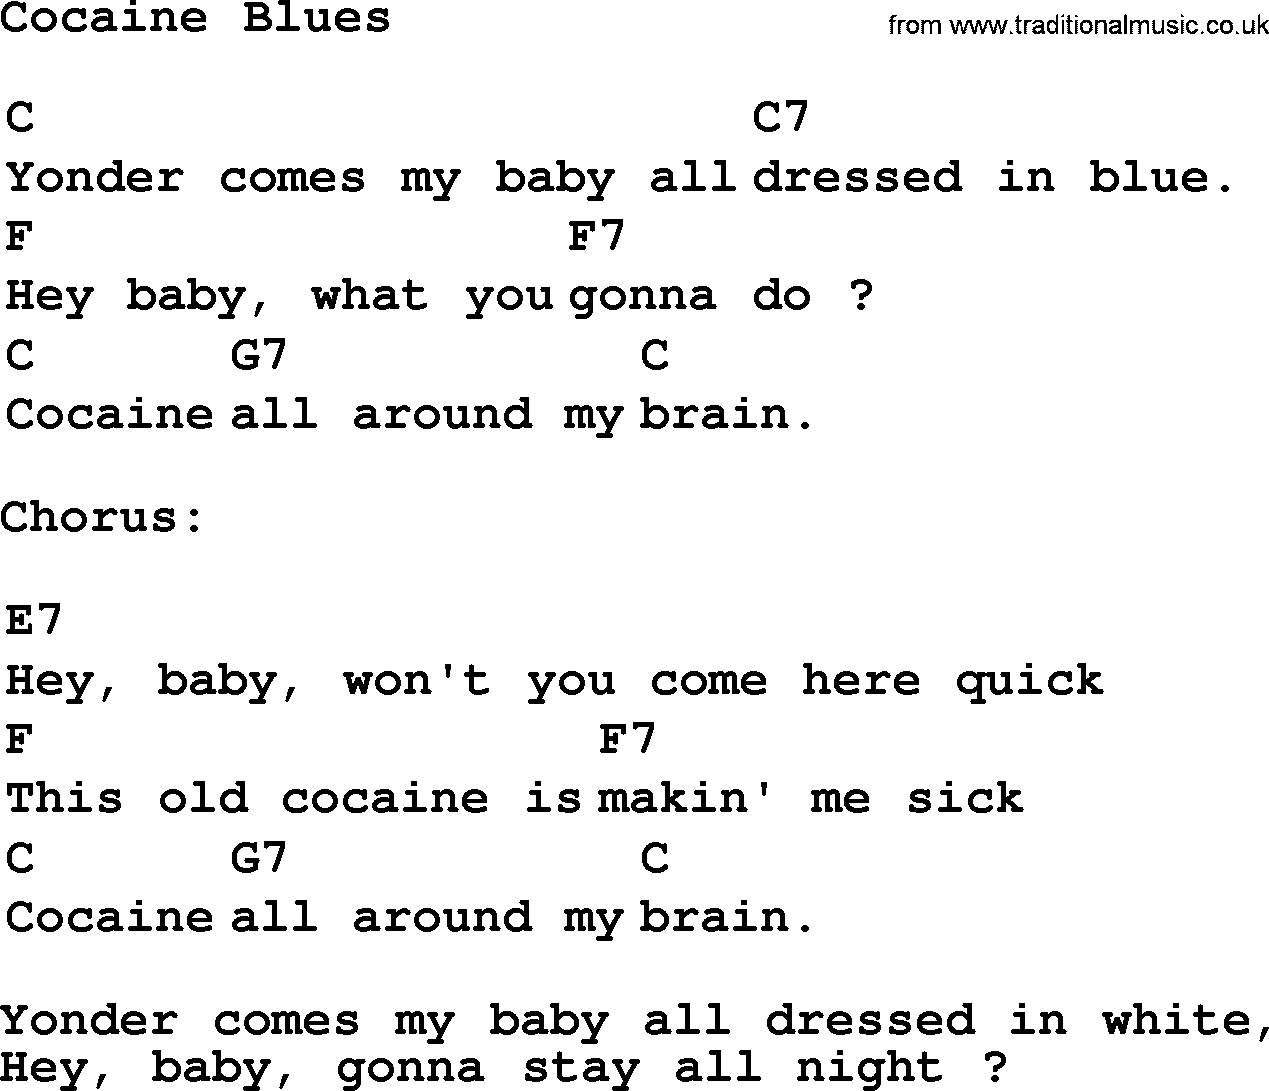 Top 1000 Most Popular Folk and Old-time Songs: Cocaine Blues, lyrics and chords